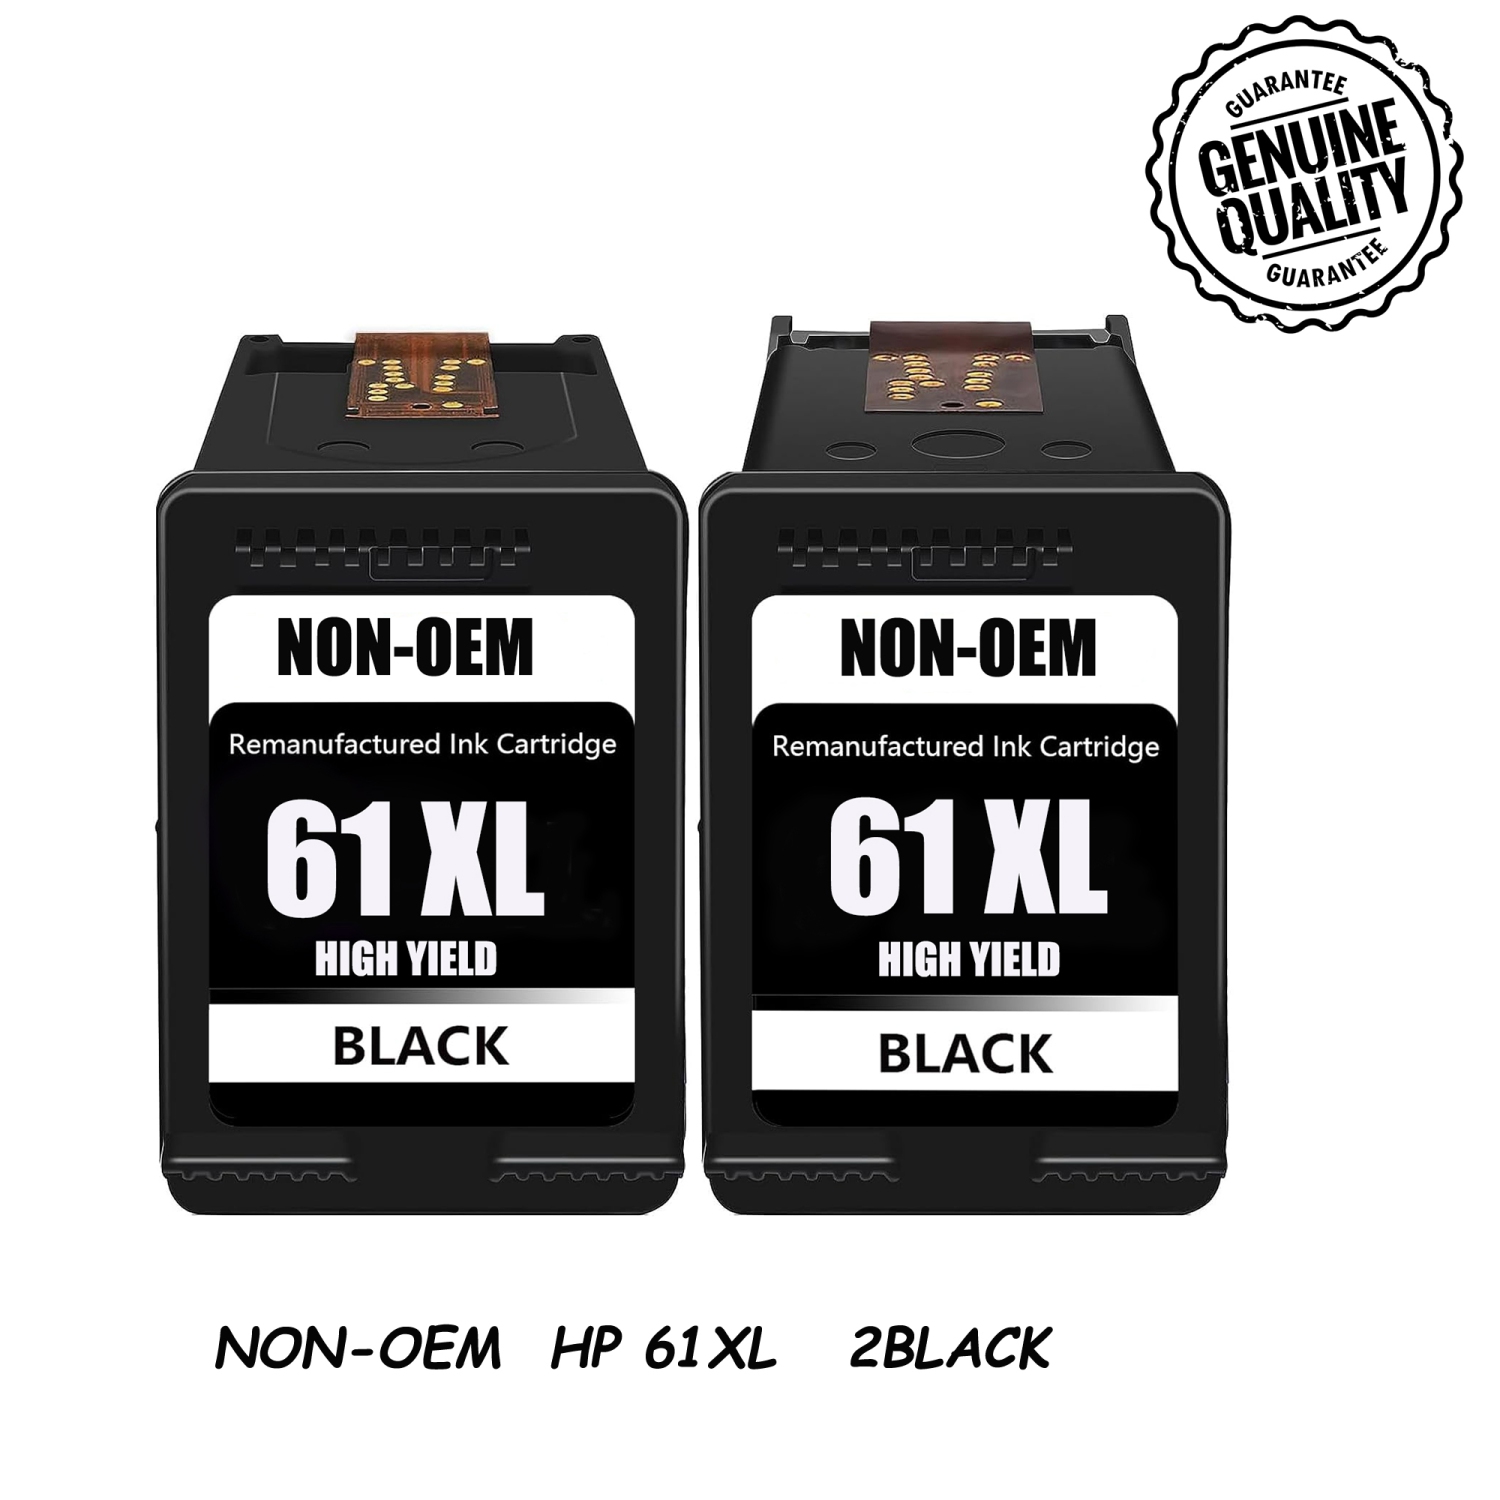 [High Yield] 2BK Remanufactured Ink Cartridge Replacement for HP 61XL for HP Envy 4500 5530 Deskjet 1000 1050 1512 1513 2540 2542 2549 3510 3050 3050A 4630 5530